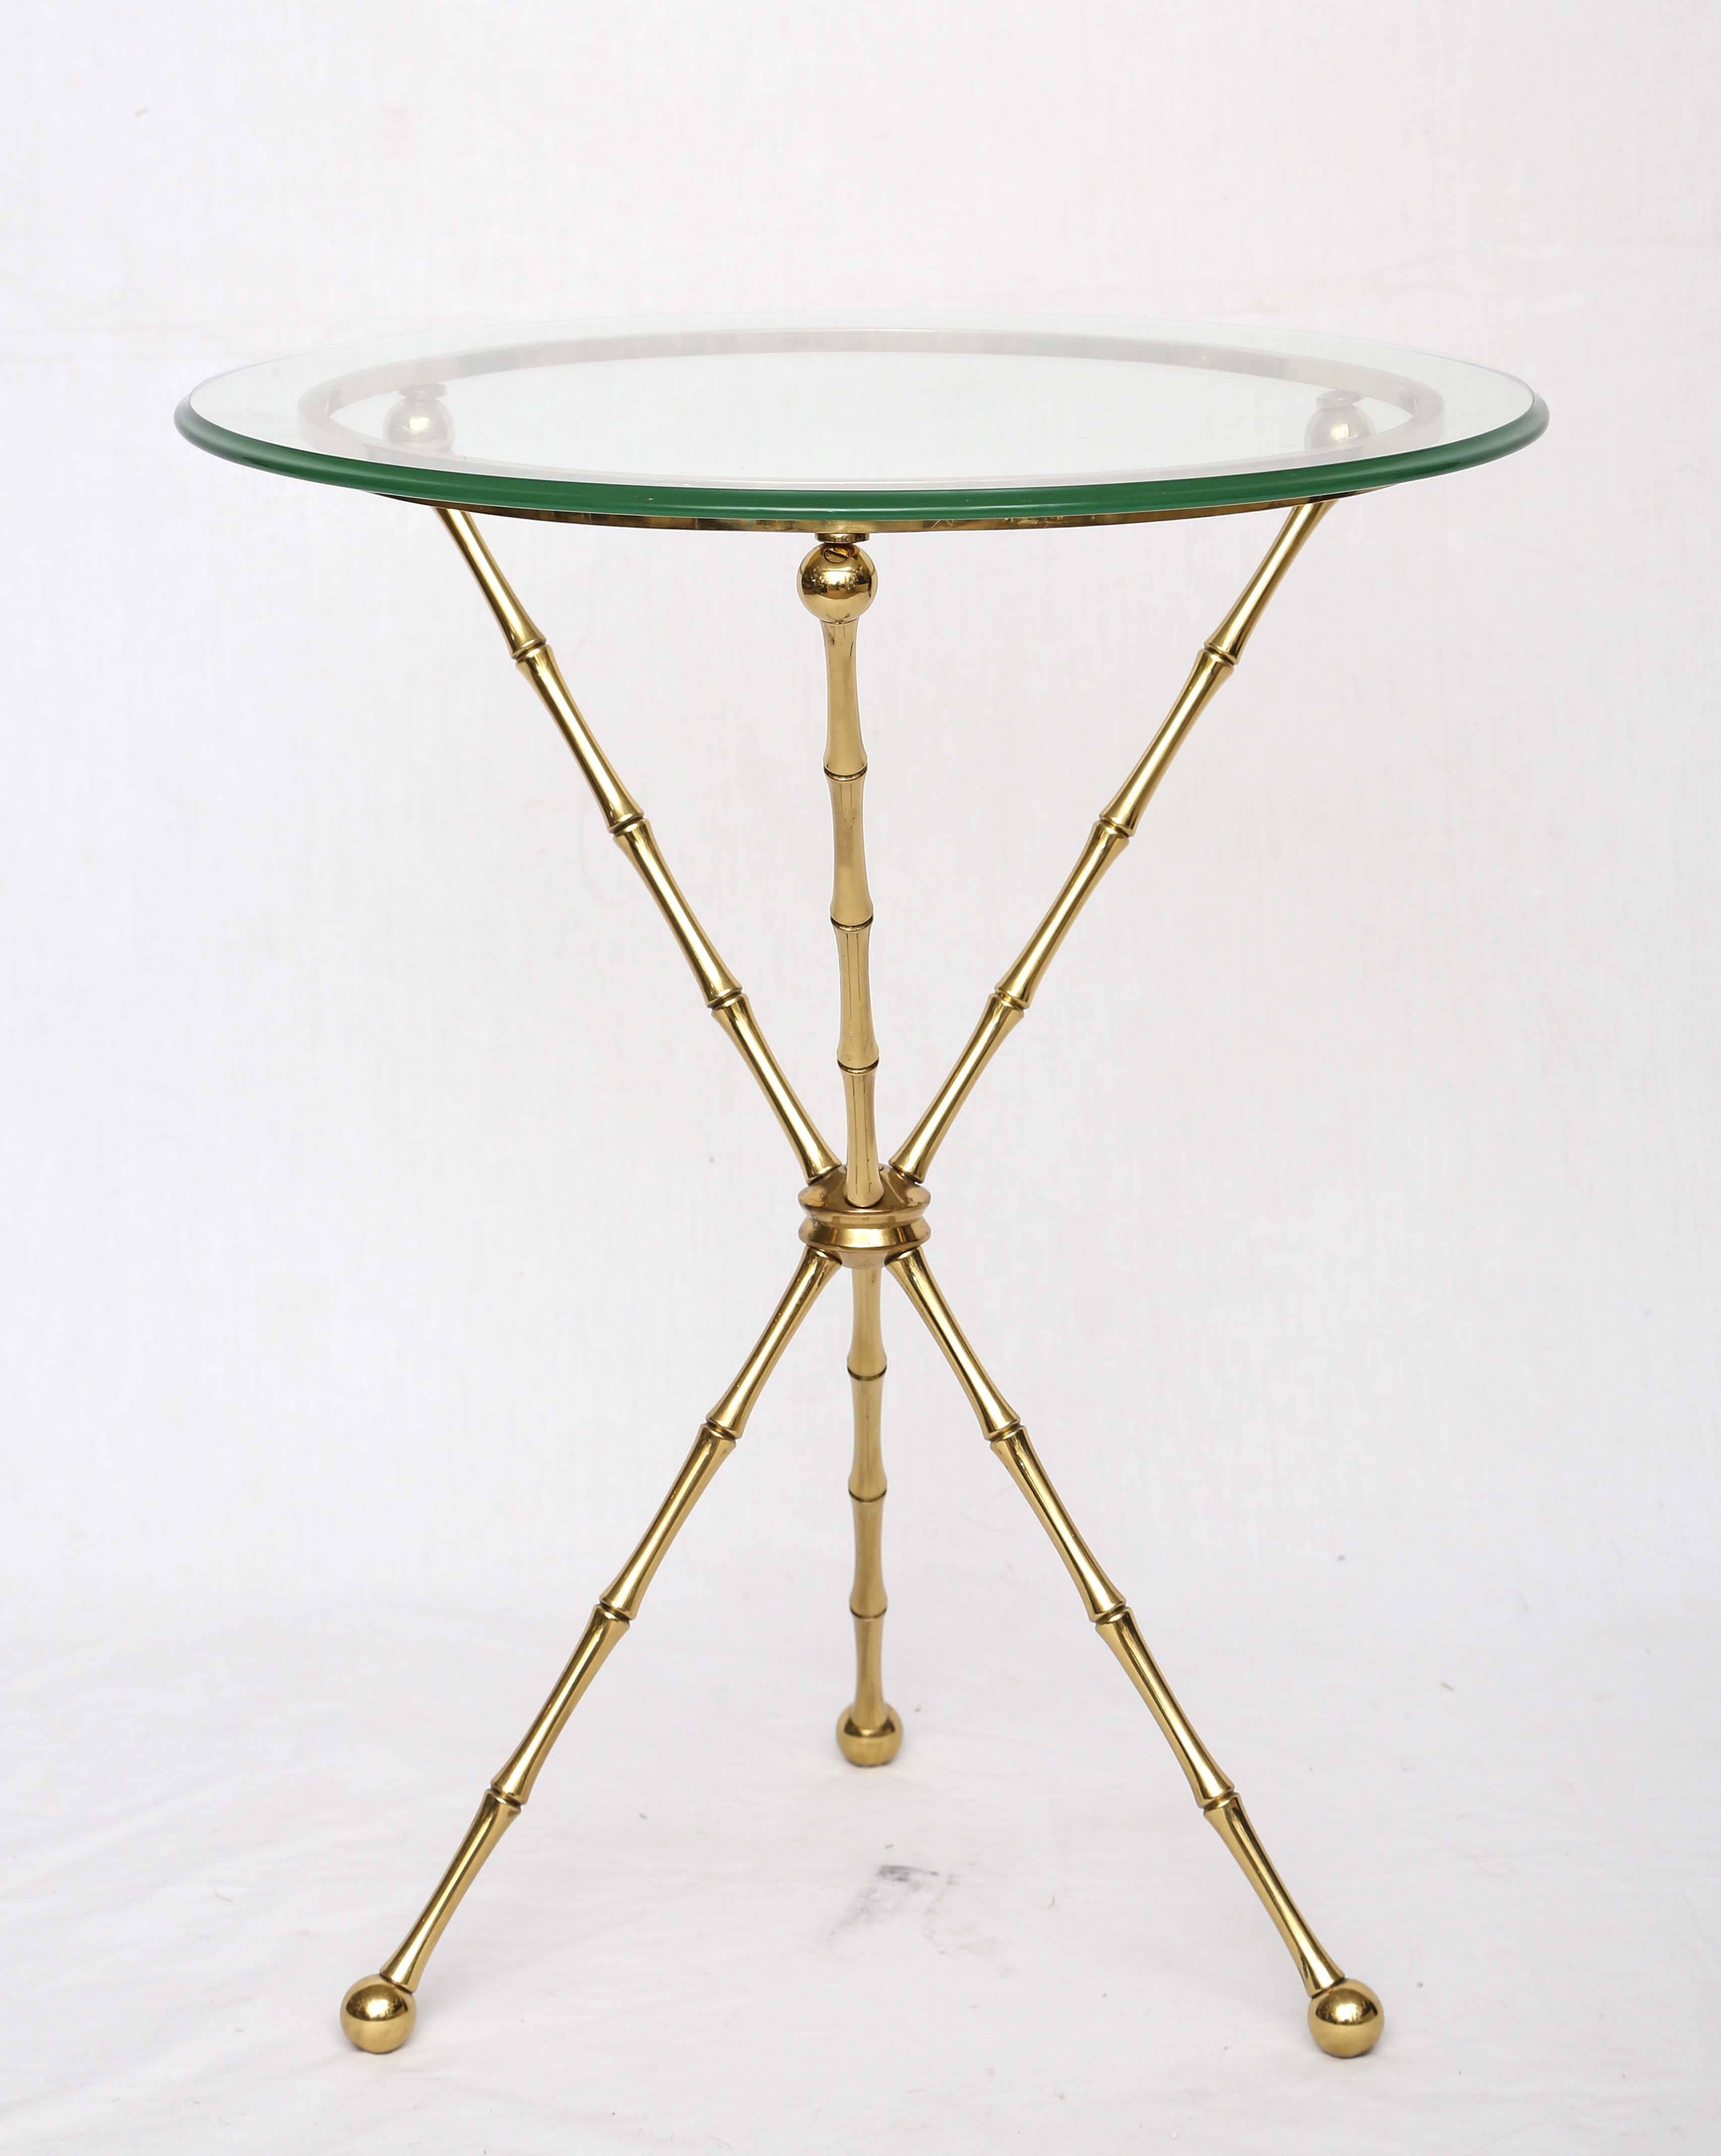 Offered is a Gio Ponti style side table with a three-legged brass base.
It comes with a round glass top.
  